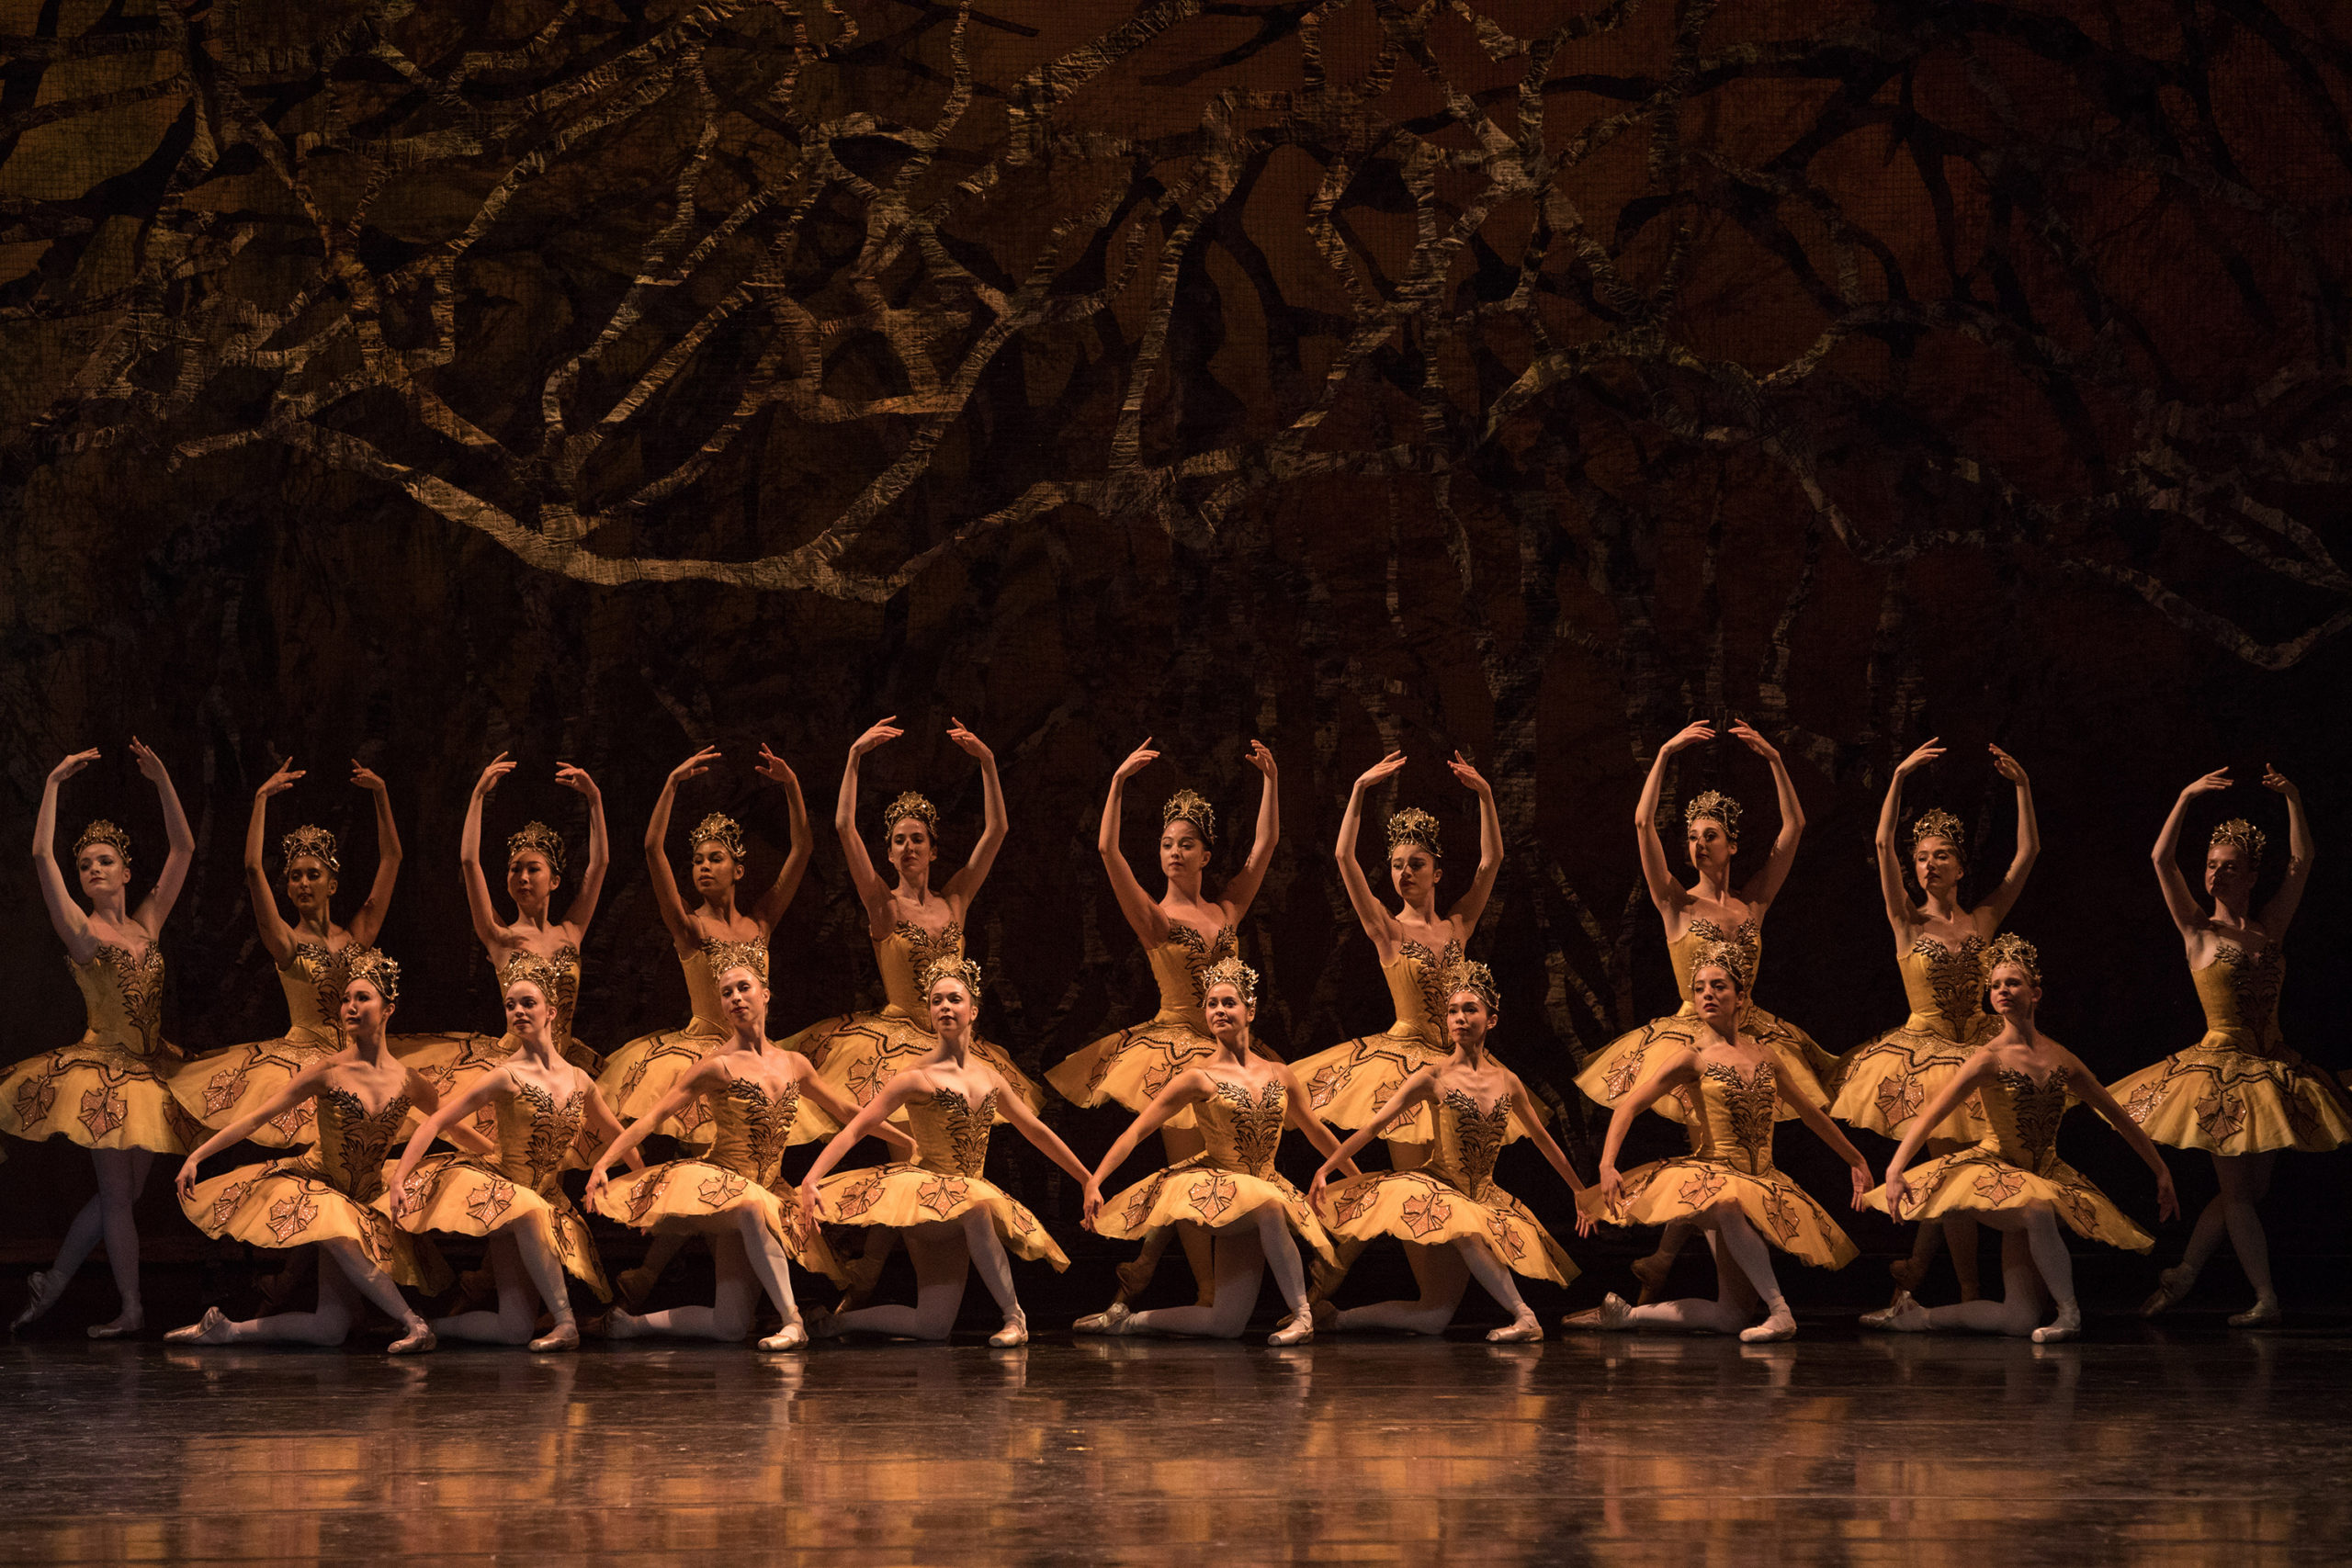 Two lines of corps de ballet dancers pose in front of a backdrop upstage. The back line stands on their right foot with their left foot in B plus and hold their arms in high fifth position. The front line kneels on their left knee with their arms in demi-second. They all wear gold classical tutus and elaborate tiaras, pink tights and pointe shoes.